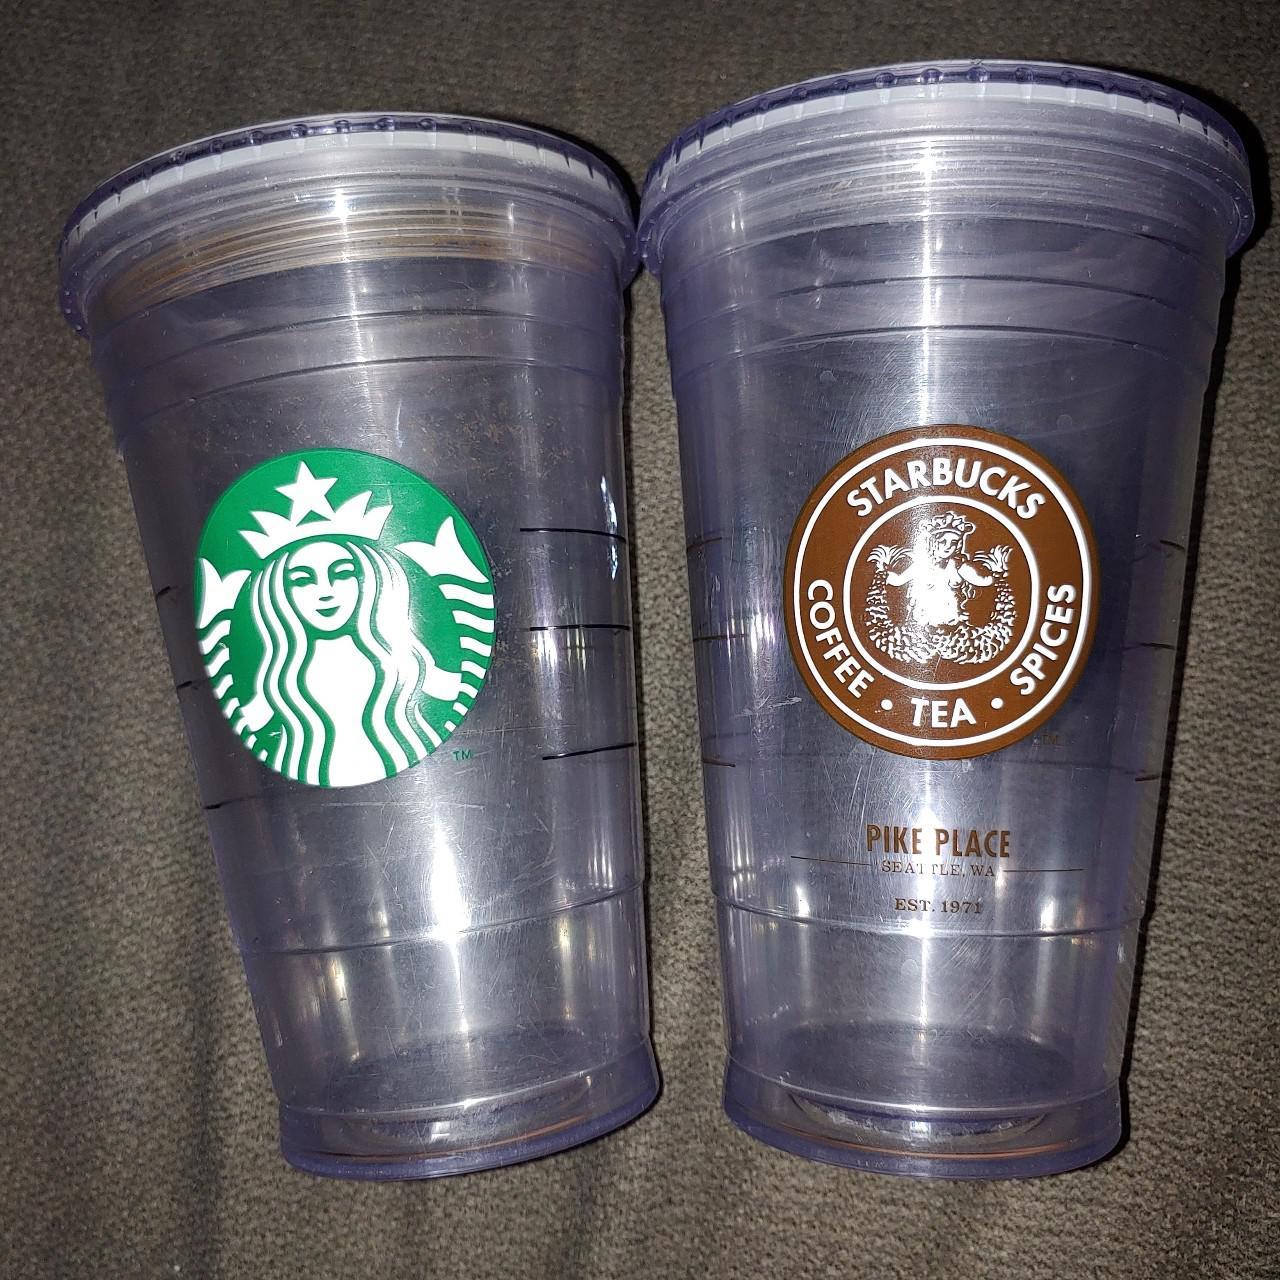 Starbucks Core Plastic Cold Cup - Clear, 16 oz - Ralphs